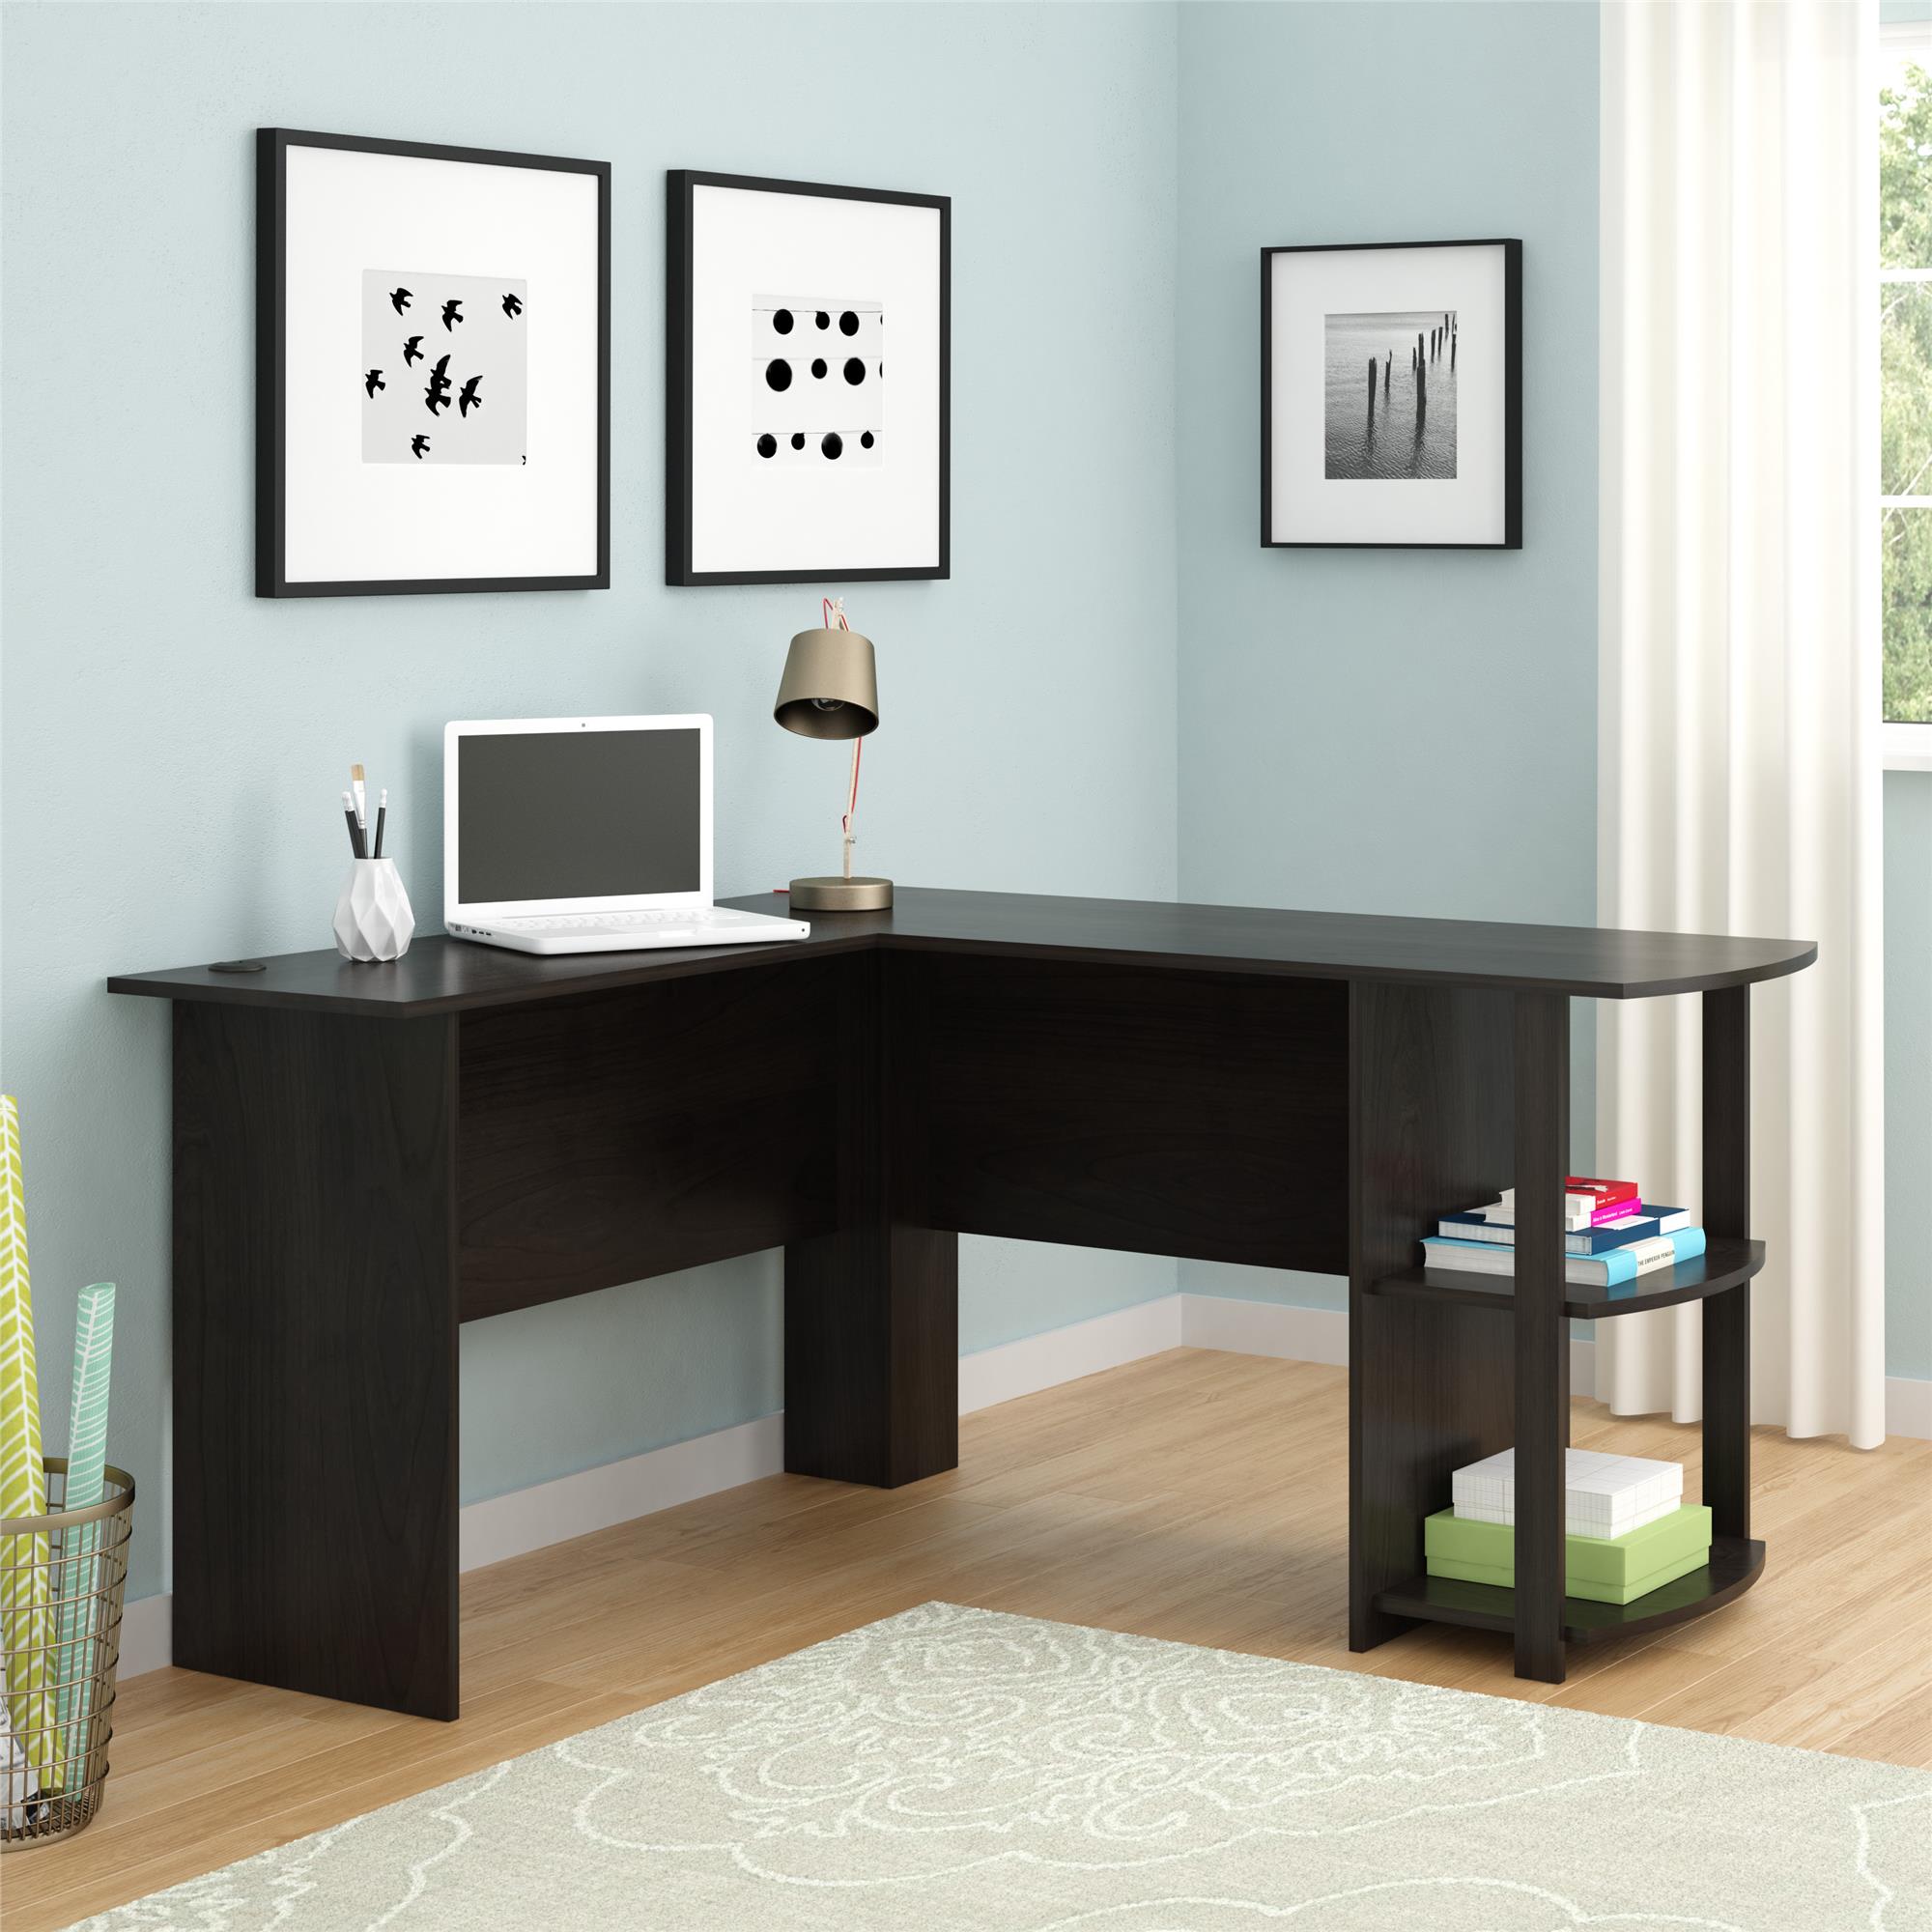 Ameriwood Home Dominic L Desk with Bookshelves, Espresso - image 1 of 12